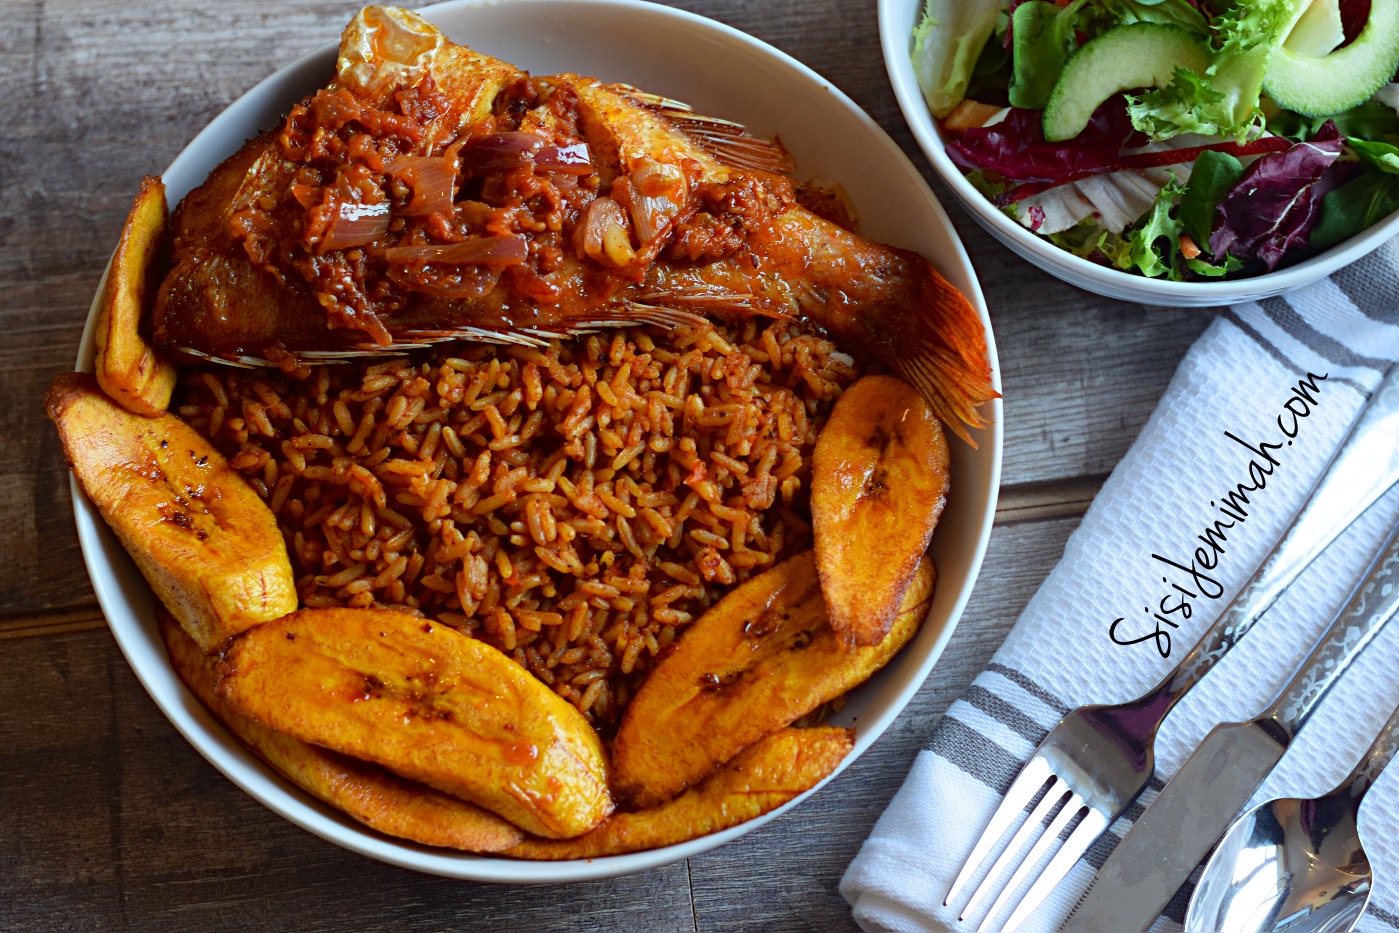 Savoring the iconic taste of Jollof rice – a dish that unites Nigeria in its deliciousness.